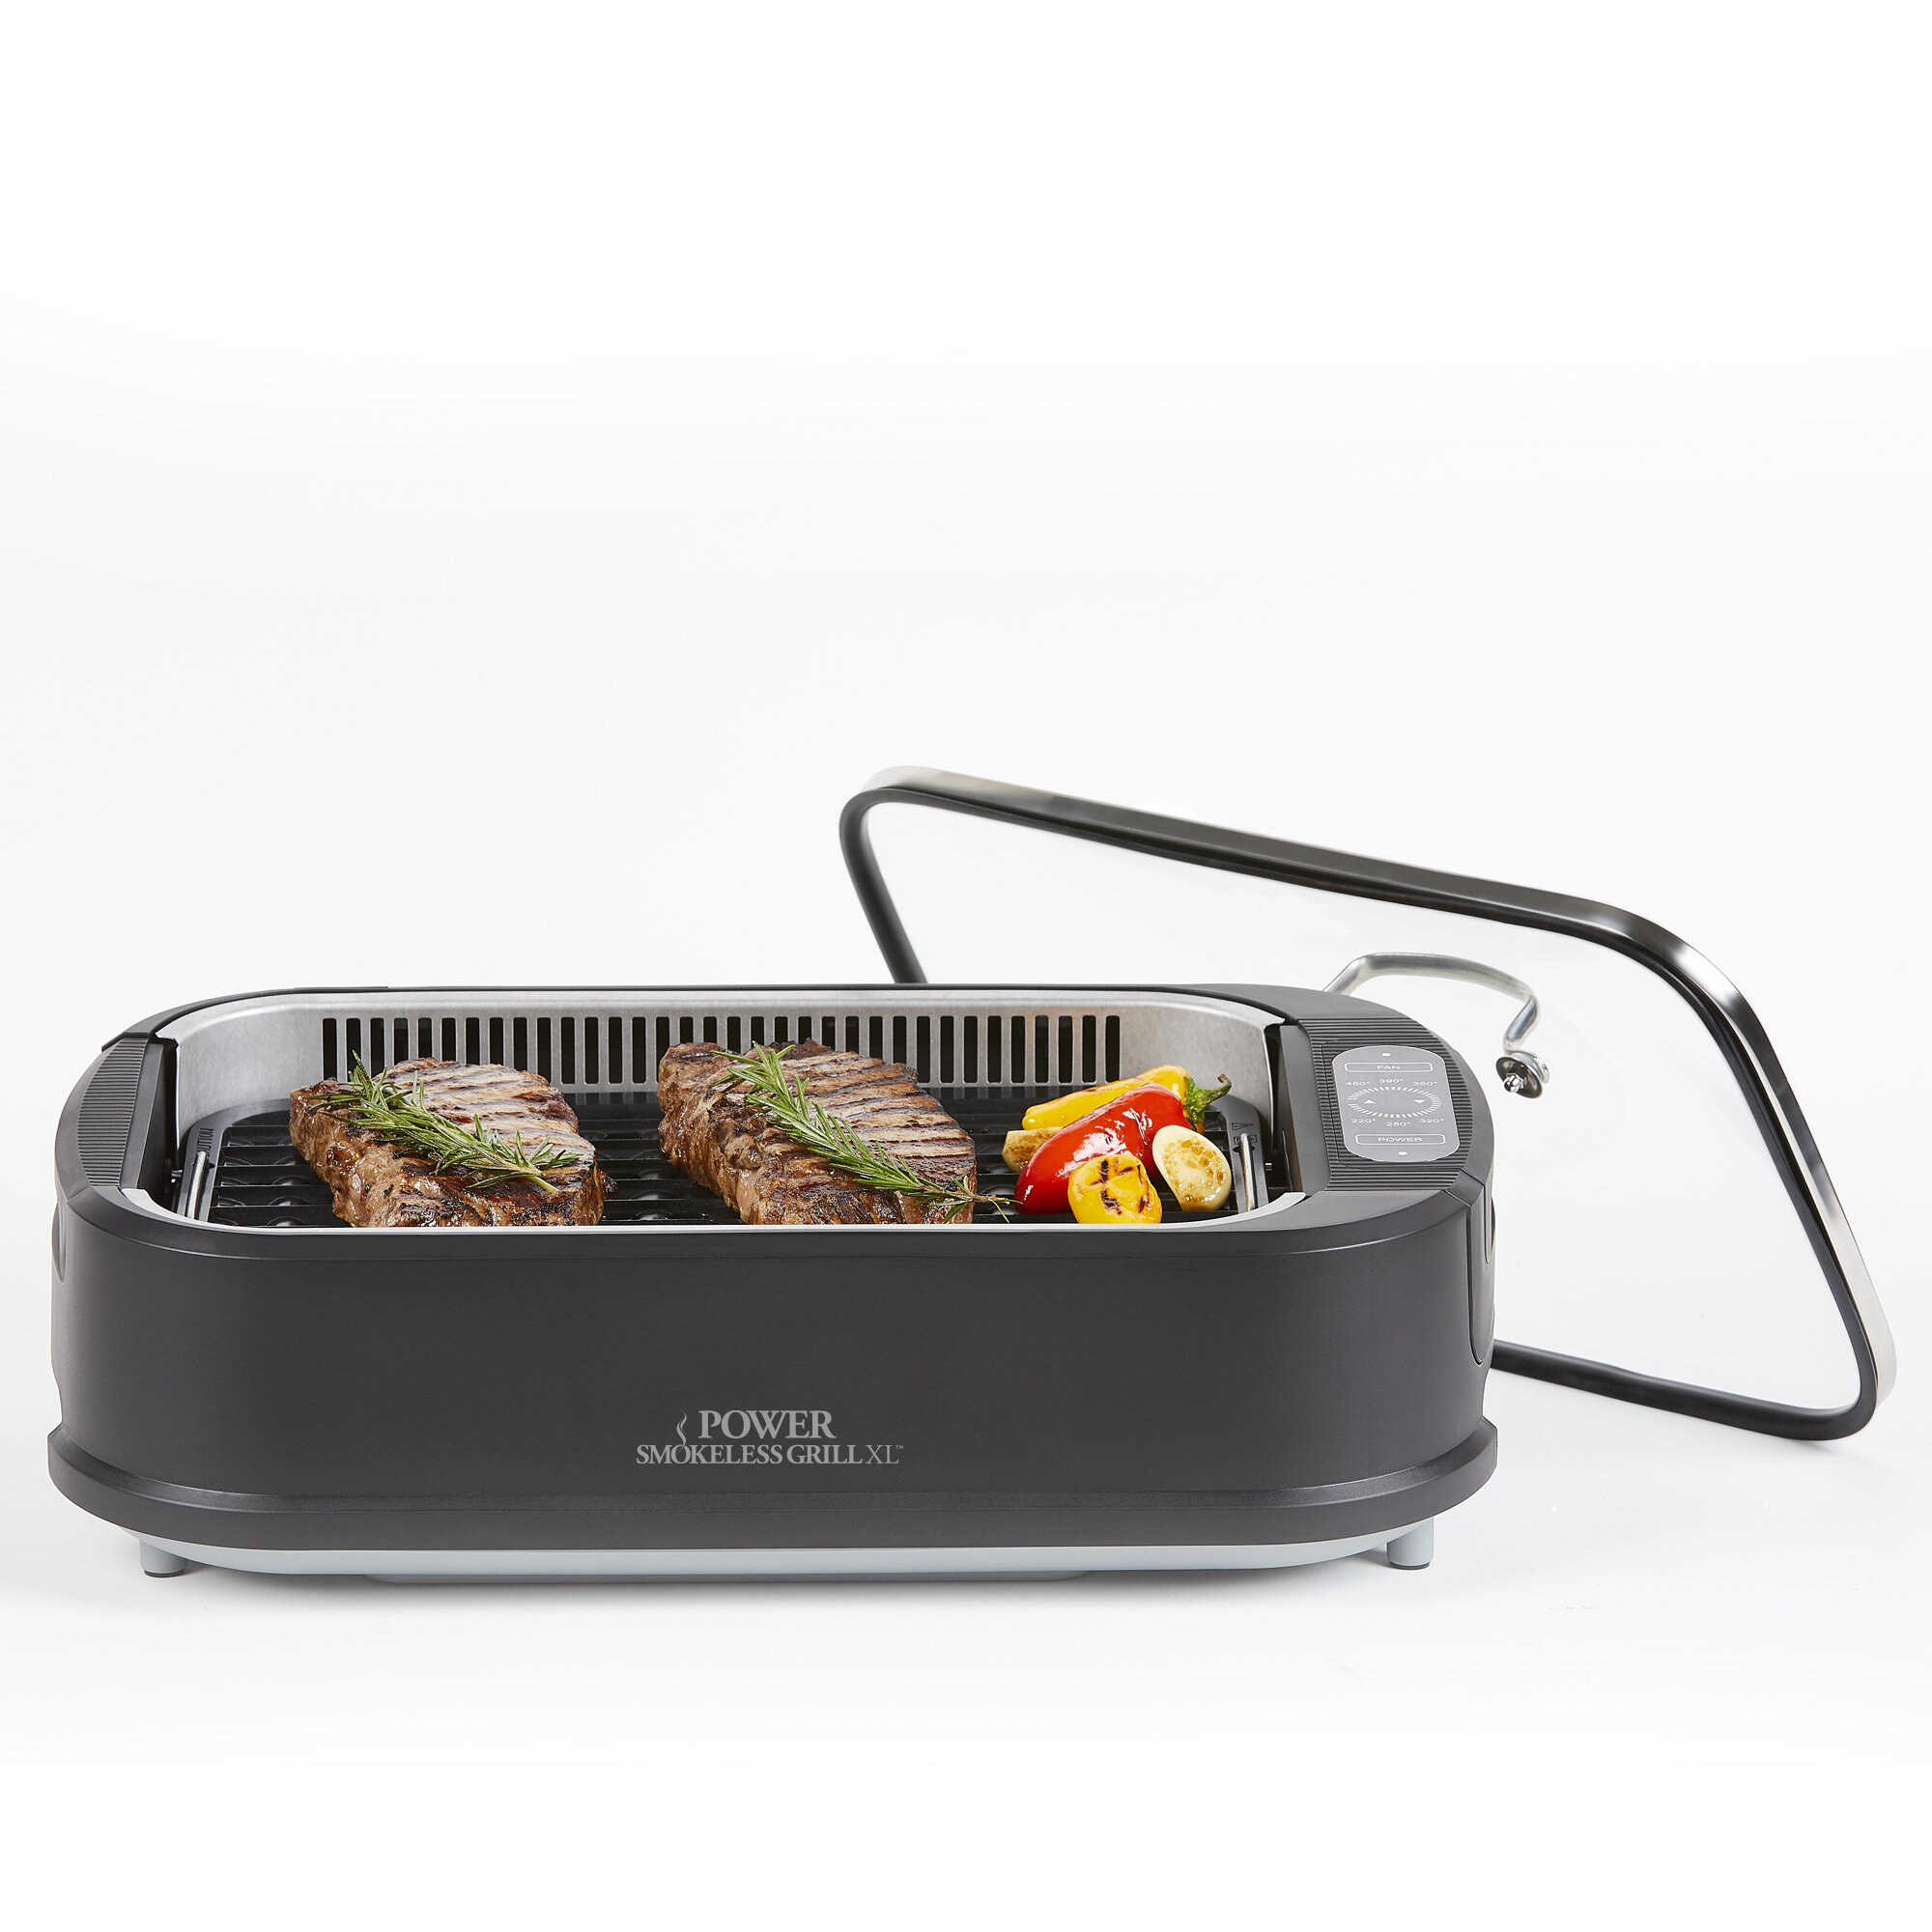 MegaChef Reversible Indoor Grill and Griddle with Removable Glass Lid